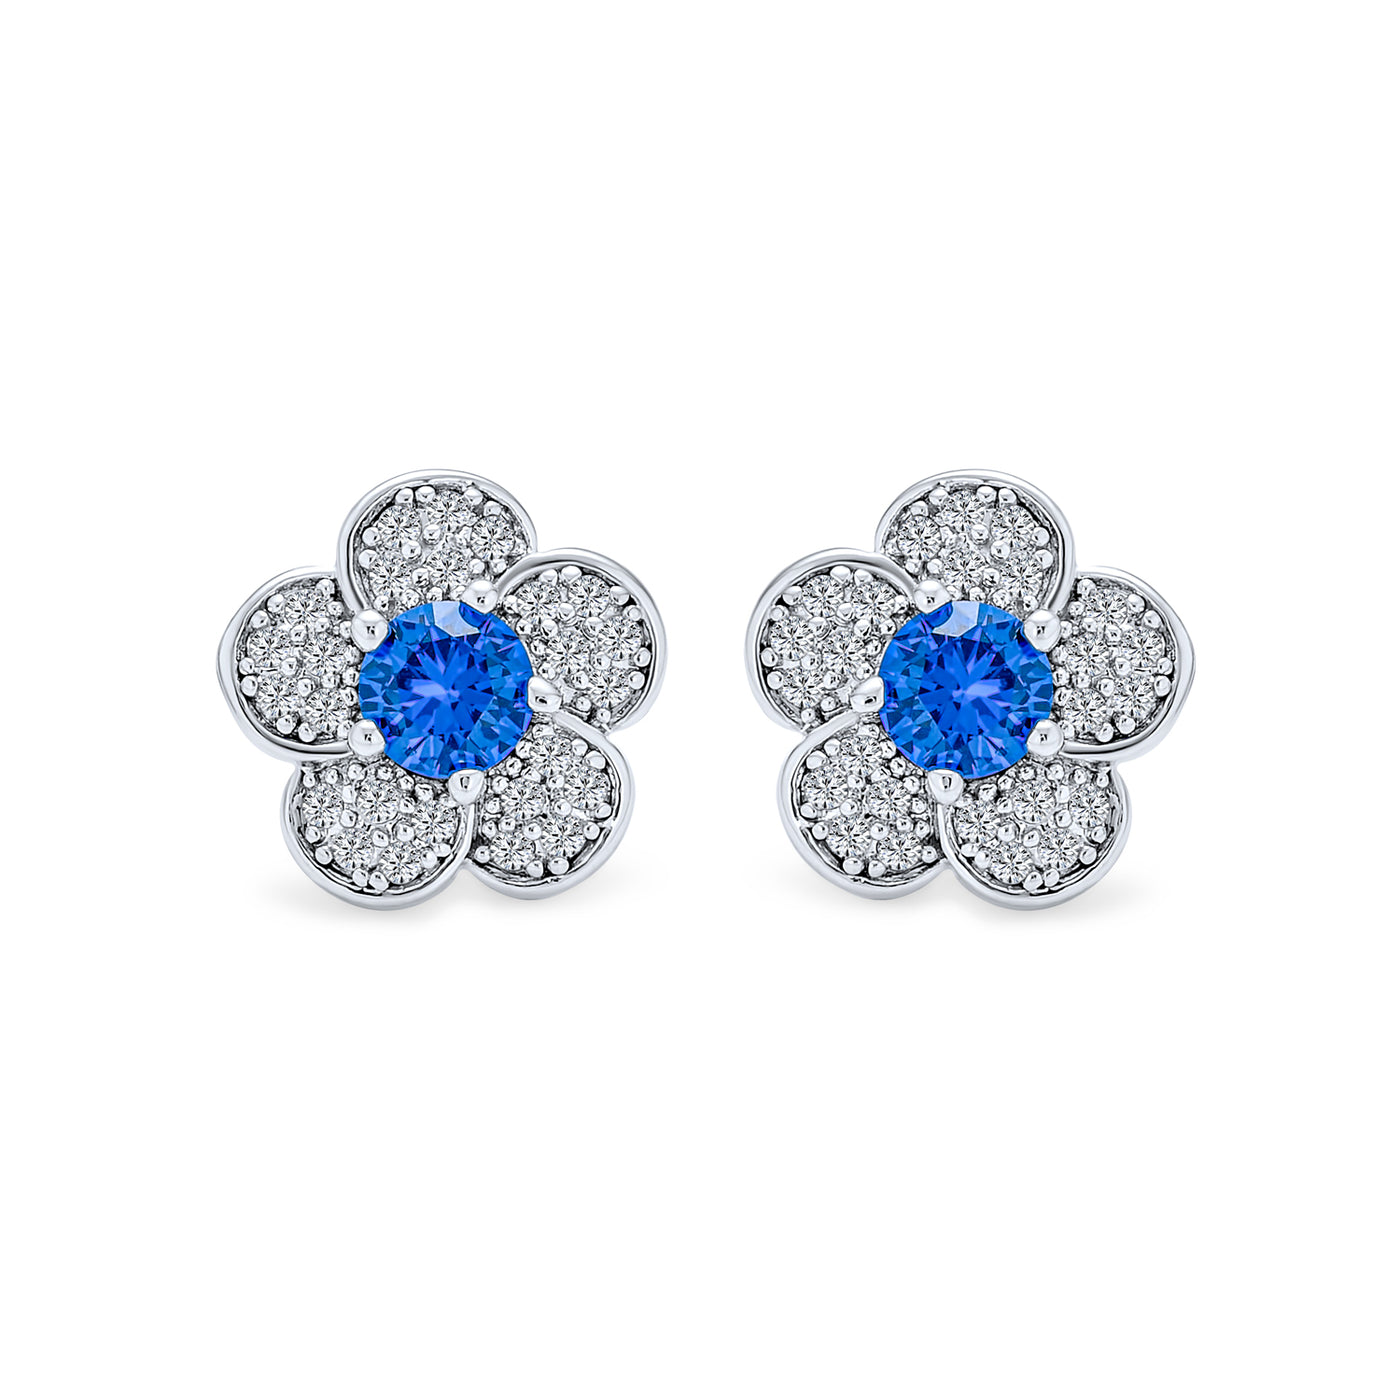 Flower Petals Pave CZ Stud Earrings Imitation Sapphire Silver Plated